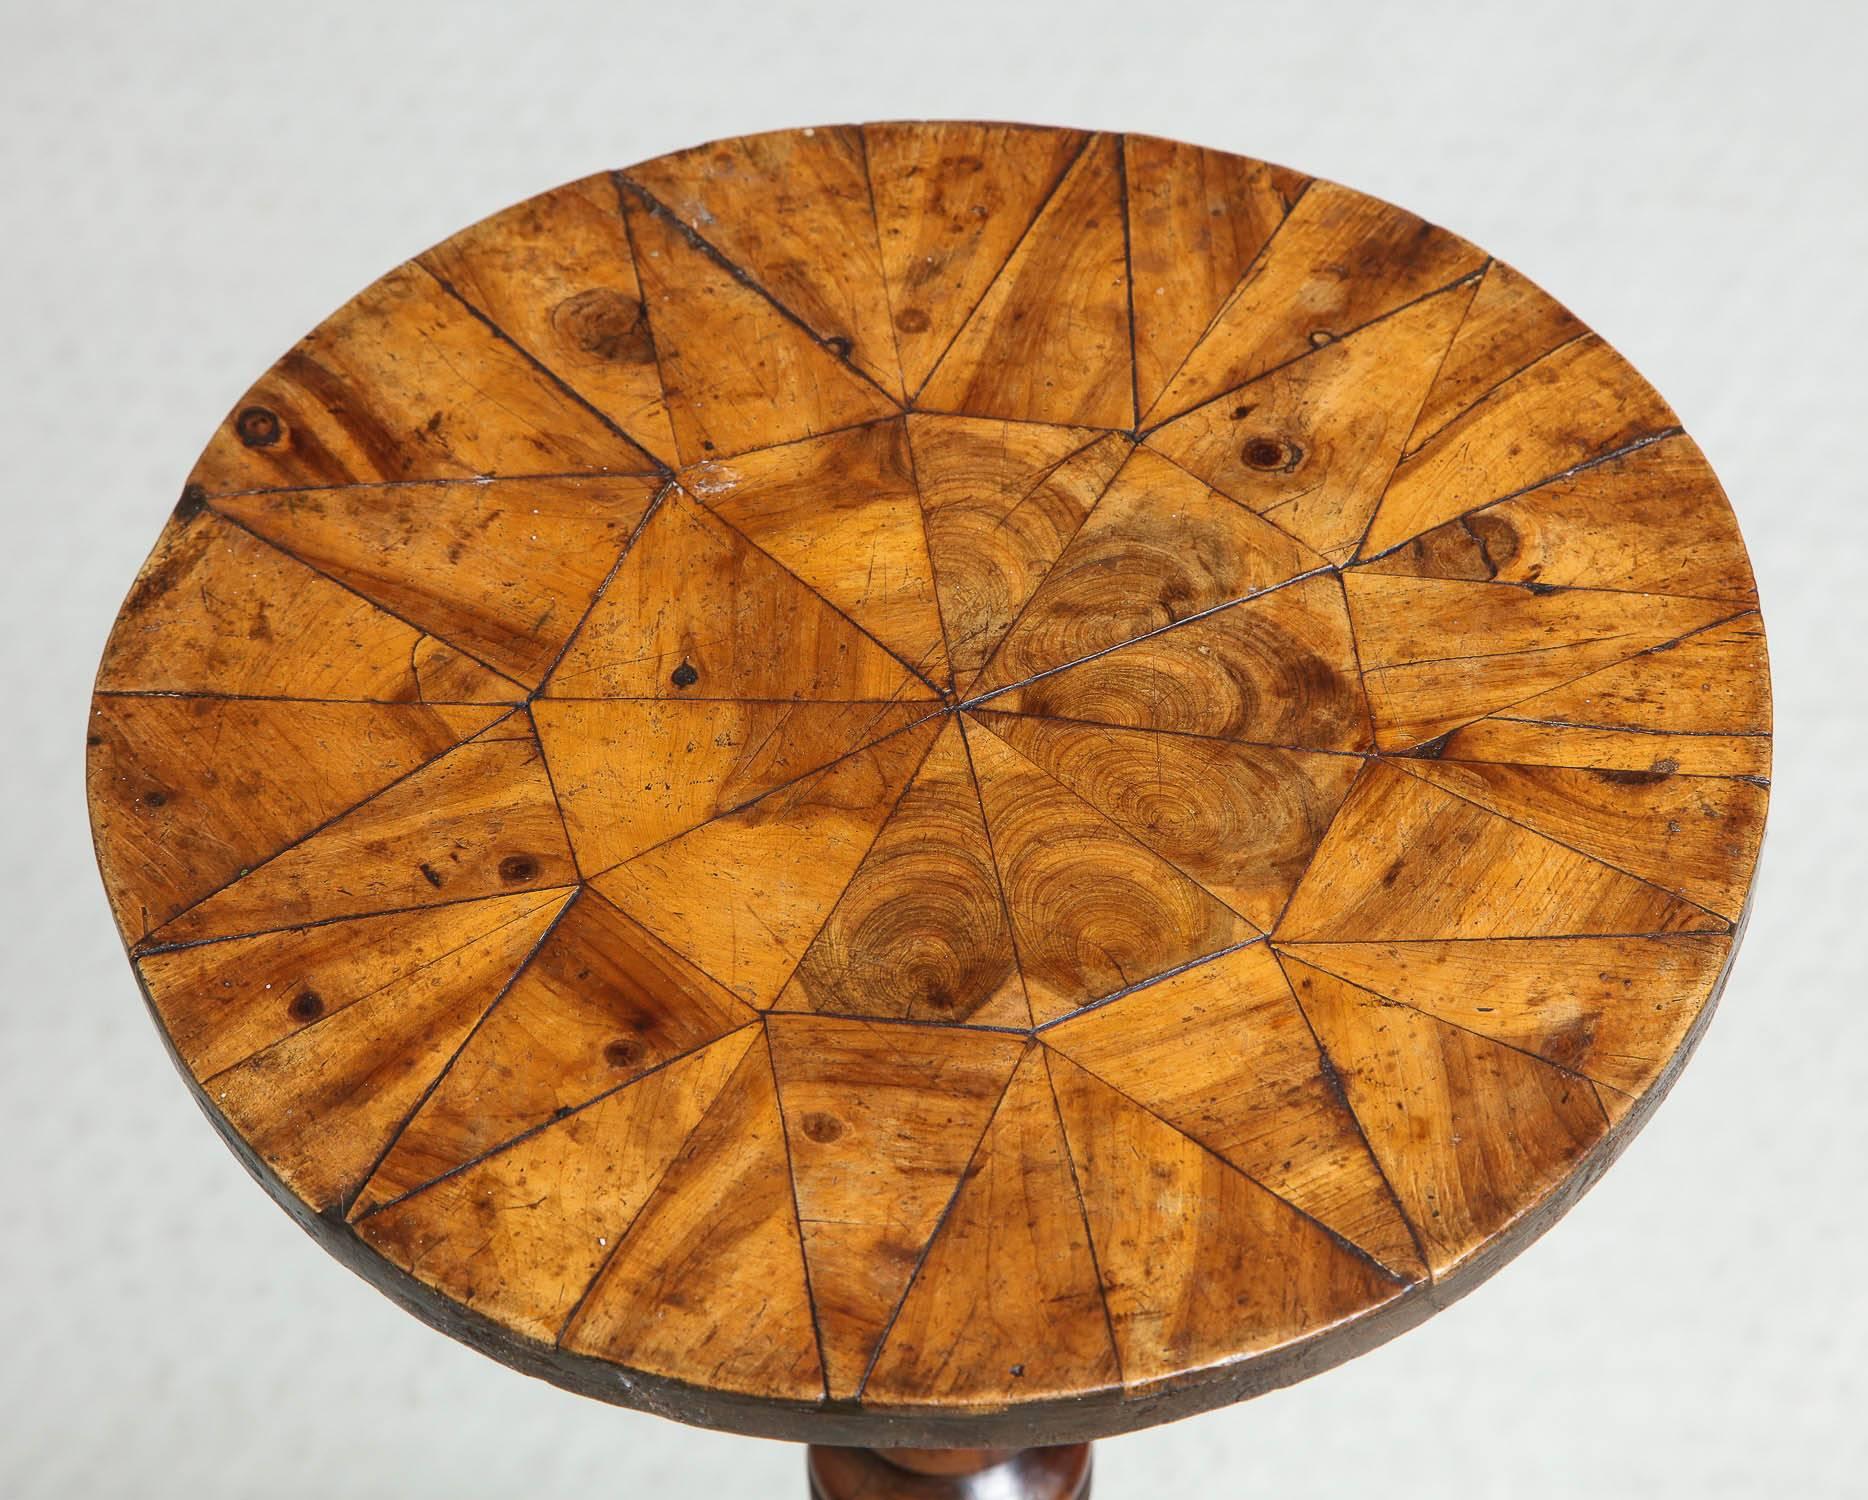 Rare English late 17th century turner's or thrown table, with yew wood parquetry top over boldly turned shaft, the four similarly turned splayed legs joined to ring turned platform, the whole possessing great color and patination and of very graphic